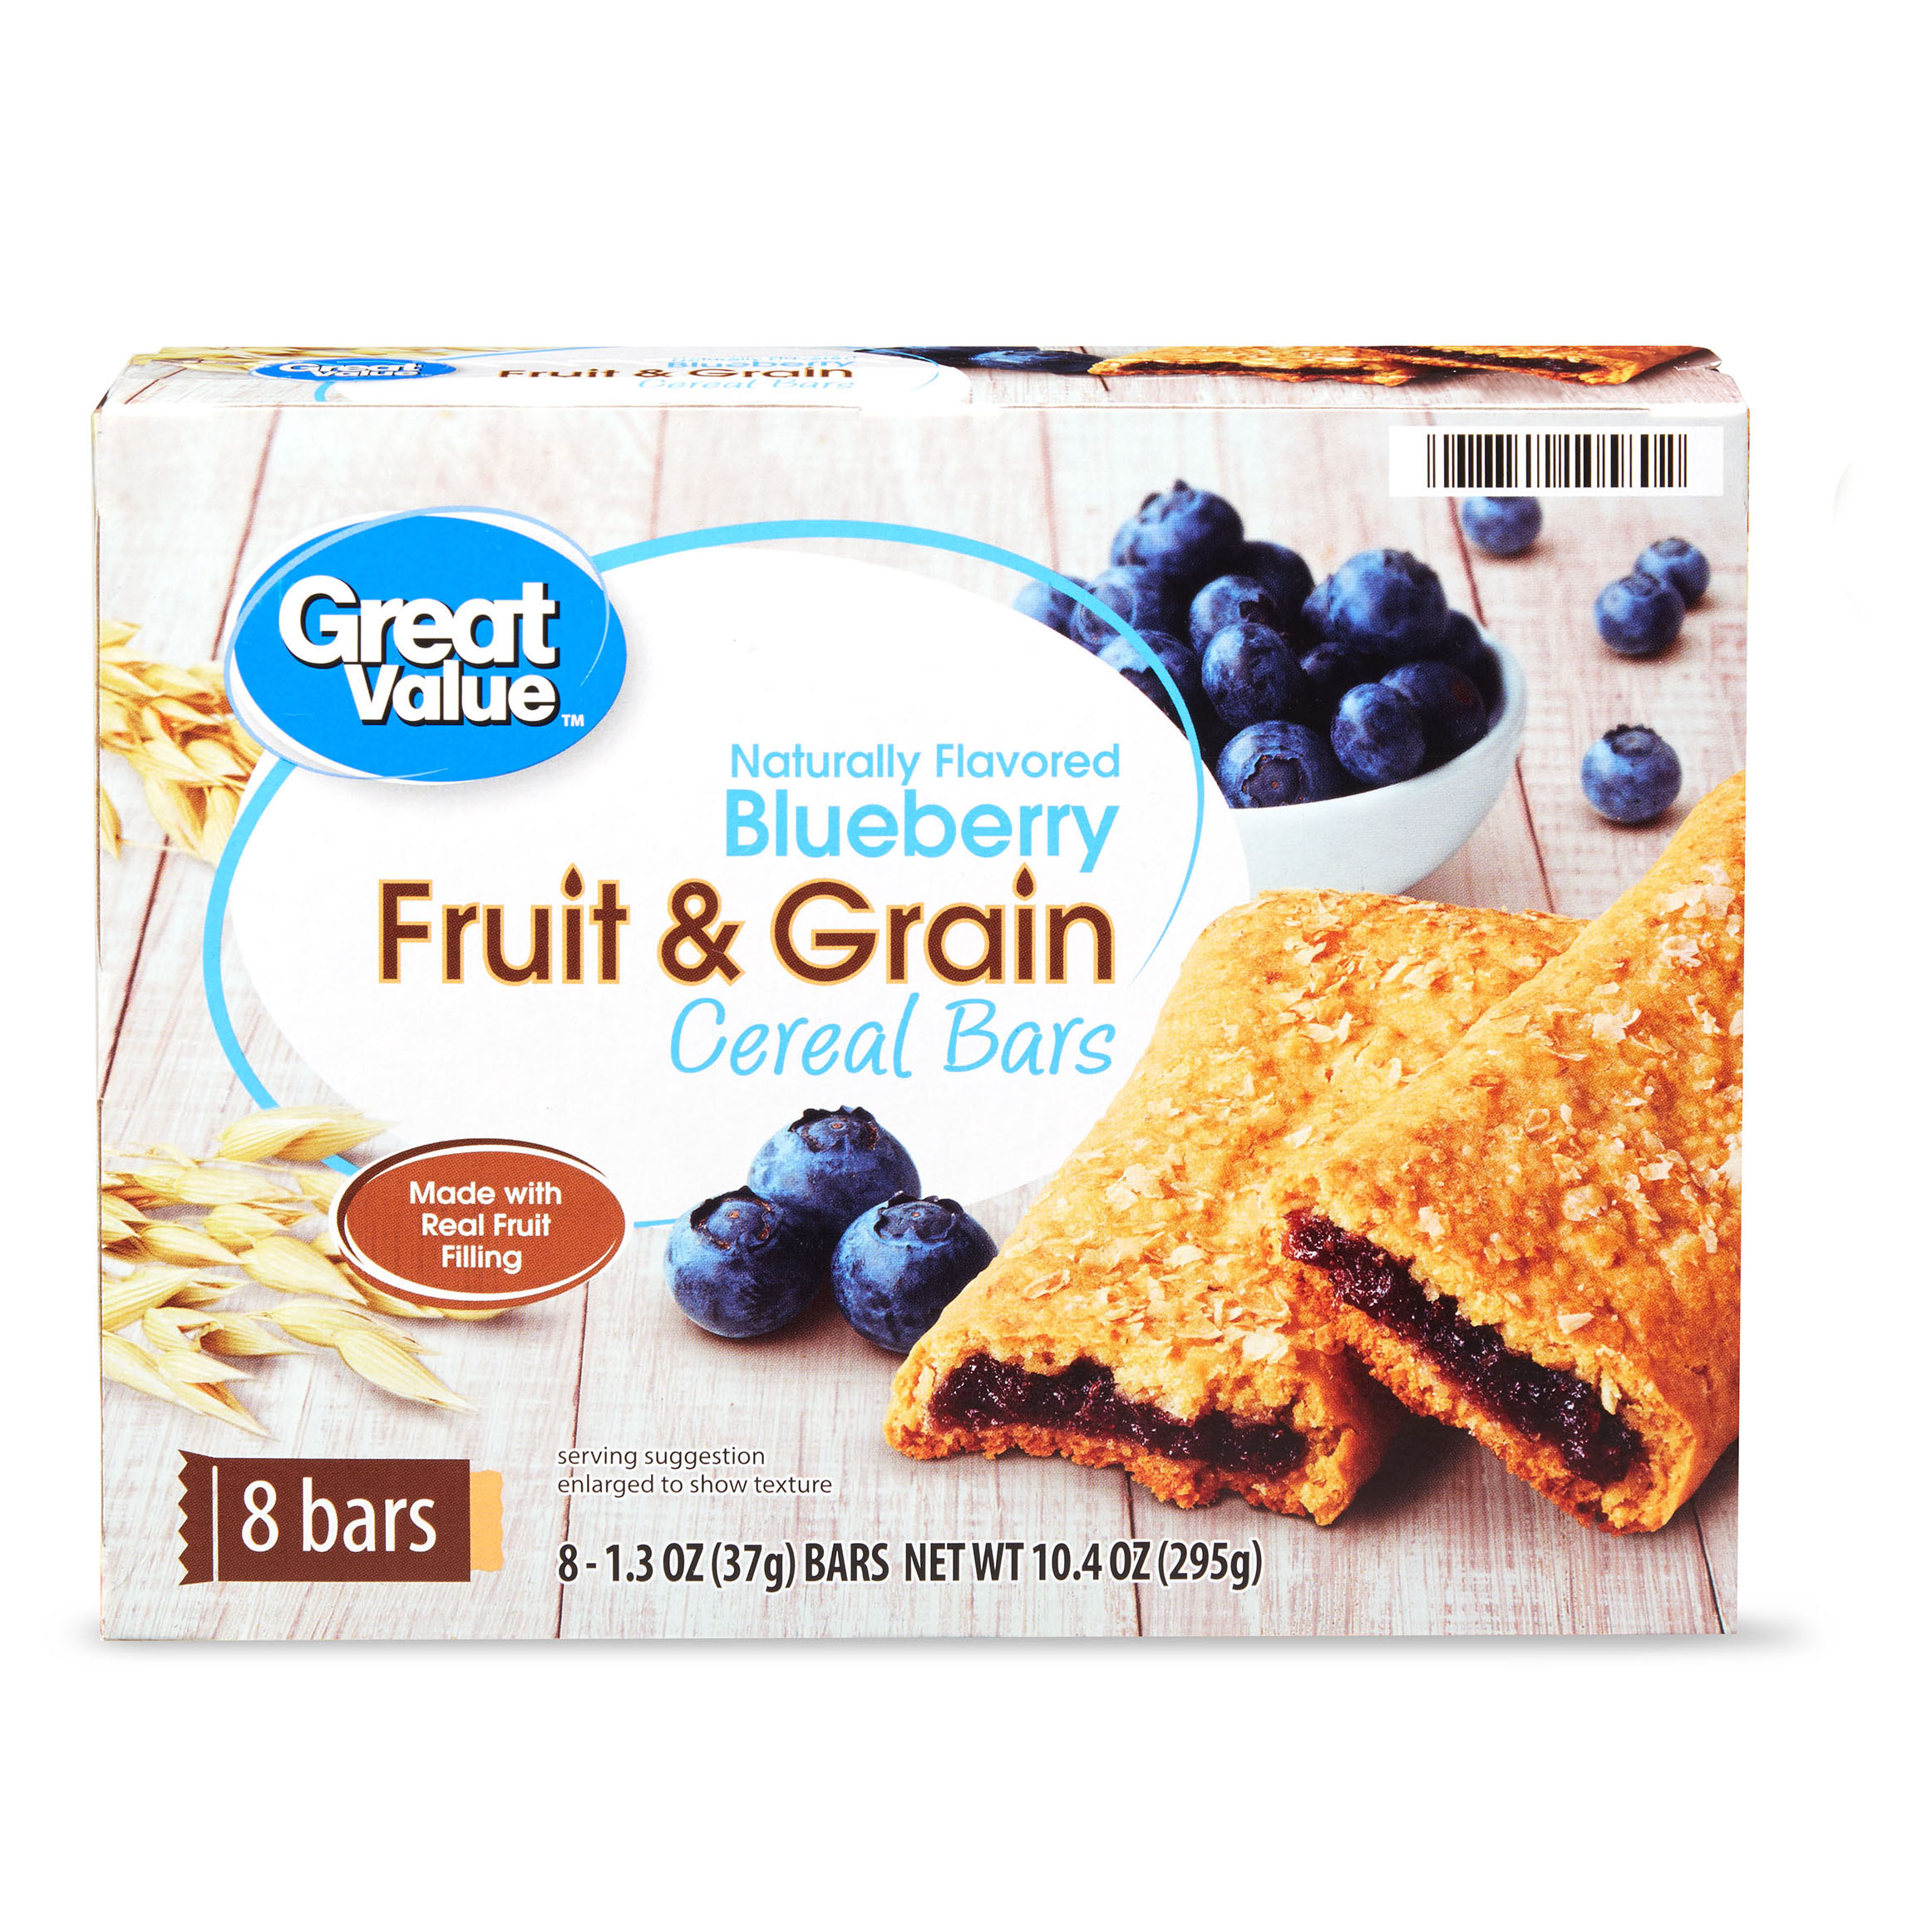 Great Value Fruit & Grain Cereal Bars Blueberry 8 Ct 1.3 Oz Image